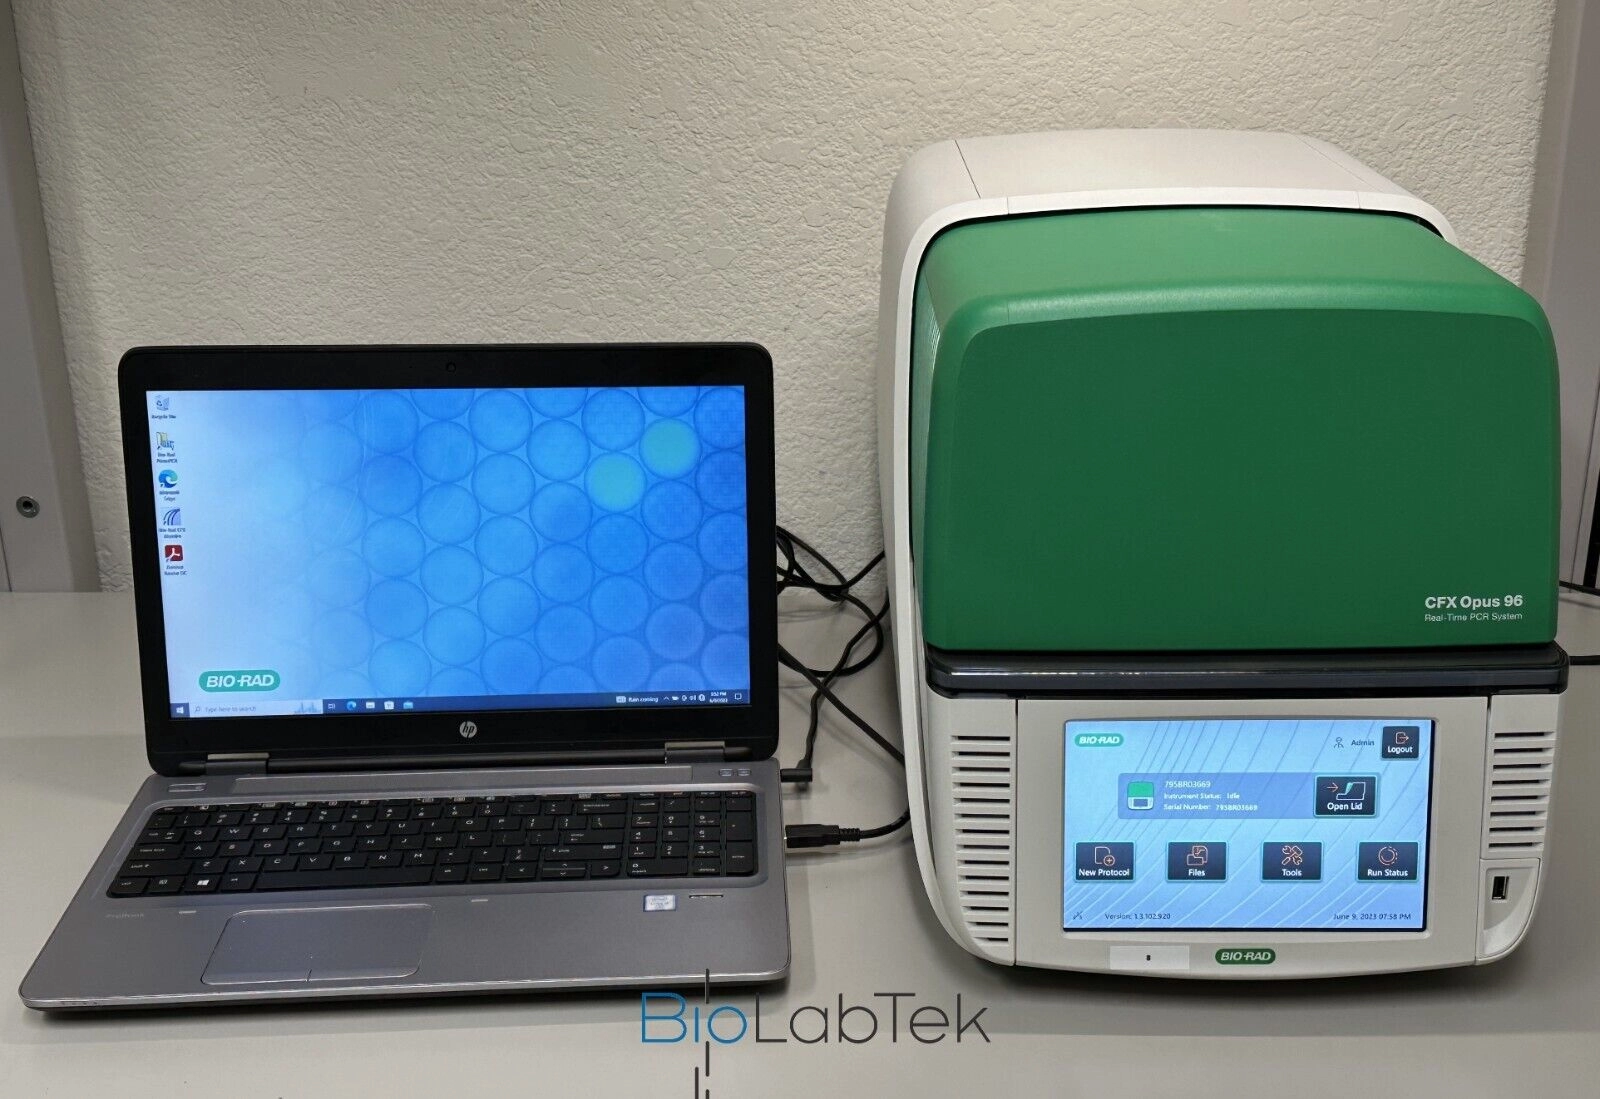 Bio-Rad CFX Opus 96 well Real-Time PCR System with